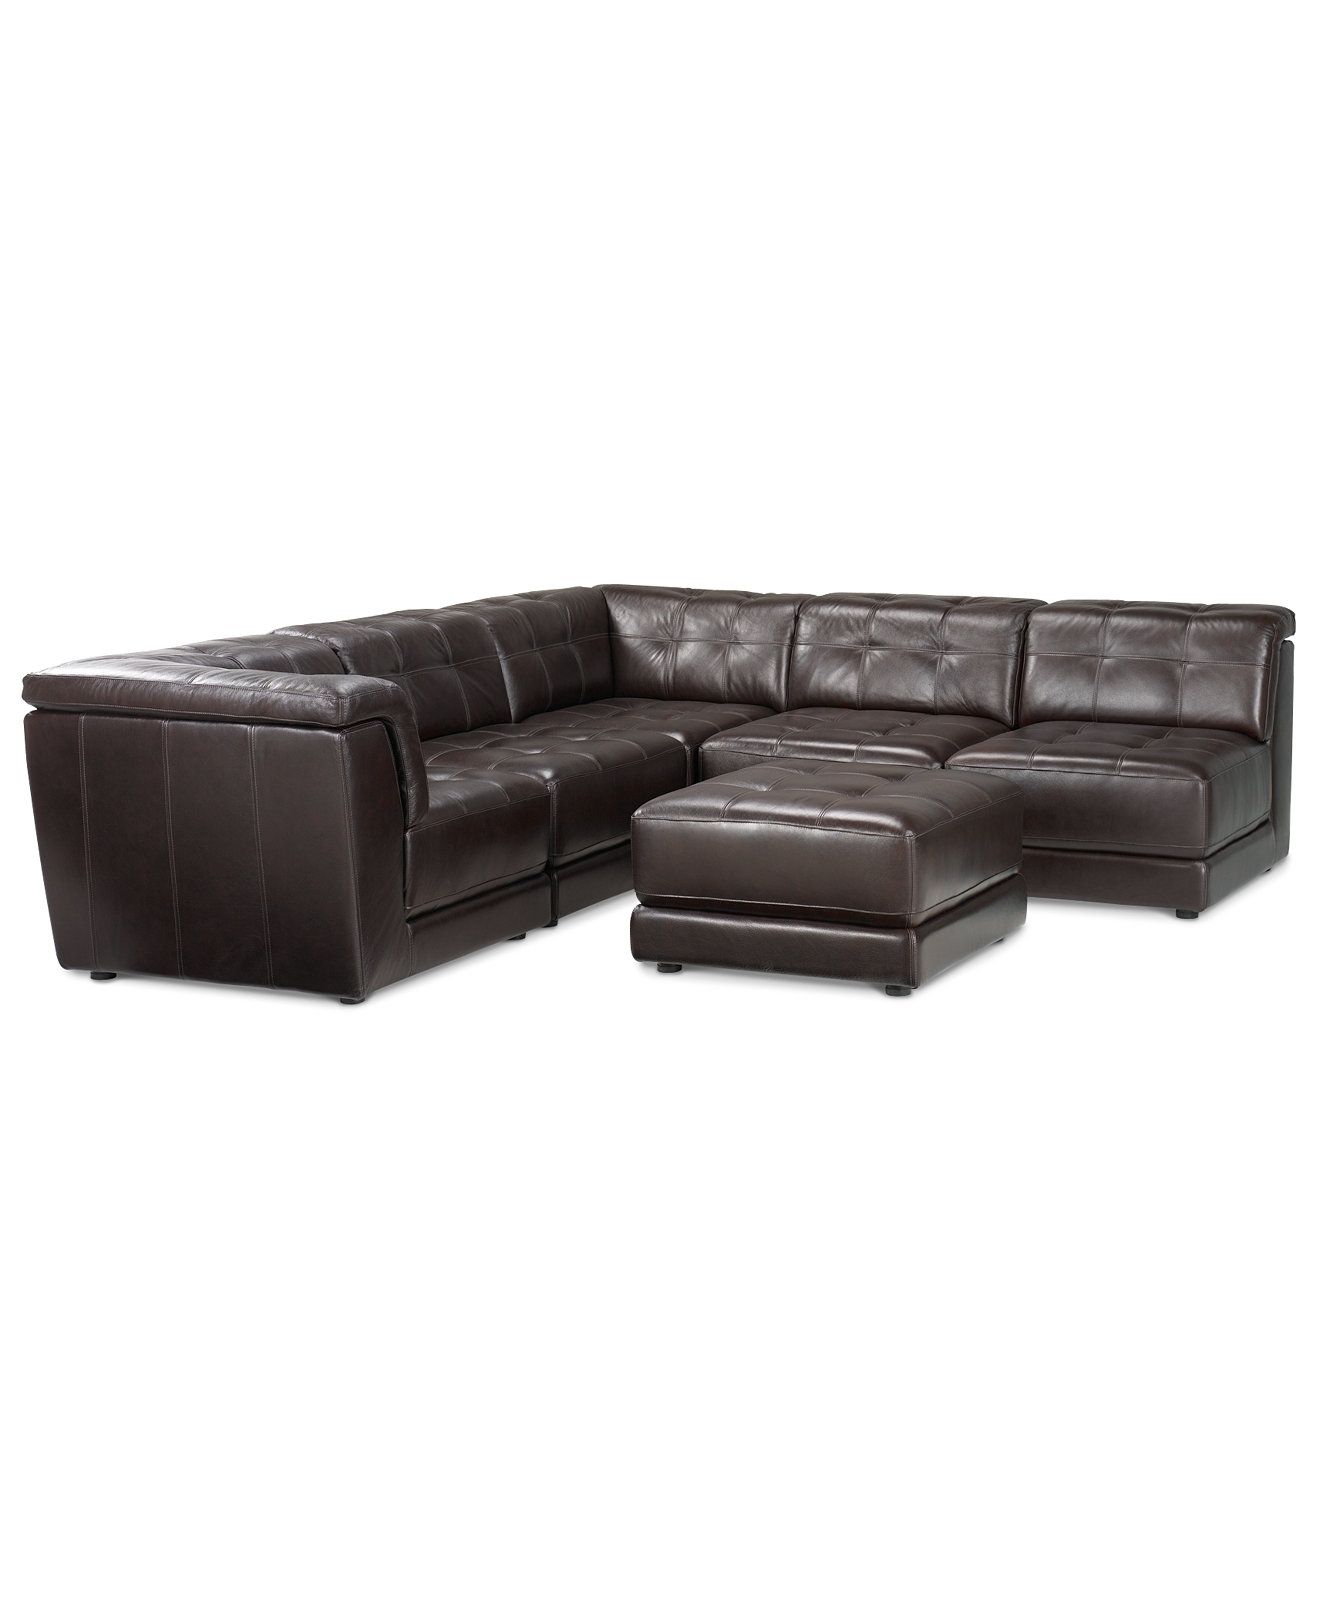 Stacey Leather 6 Piece Modular Sectional Sofa (3 Armless Chairs, 2 Throughout Newest Sectional Sofas That Come In Pieces (View 17 of 20)